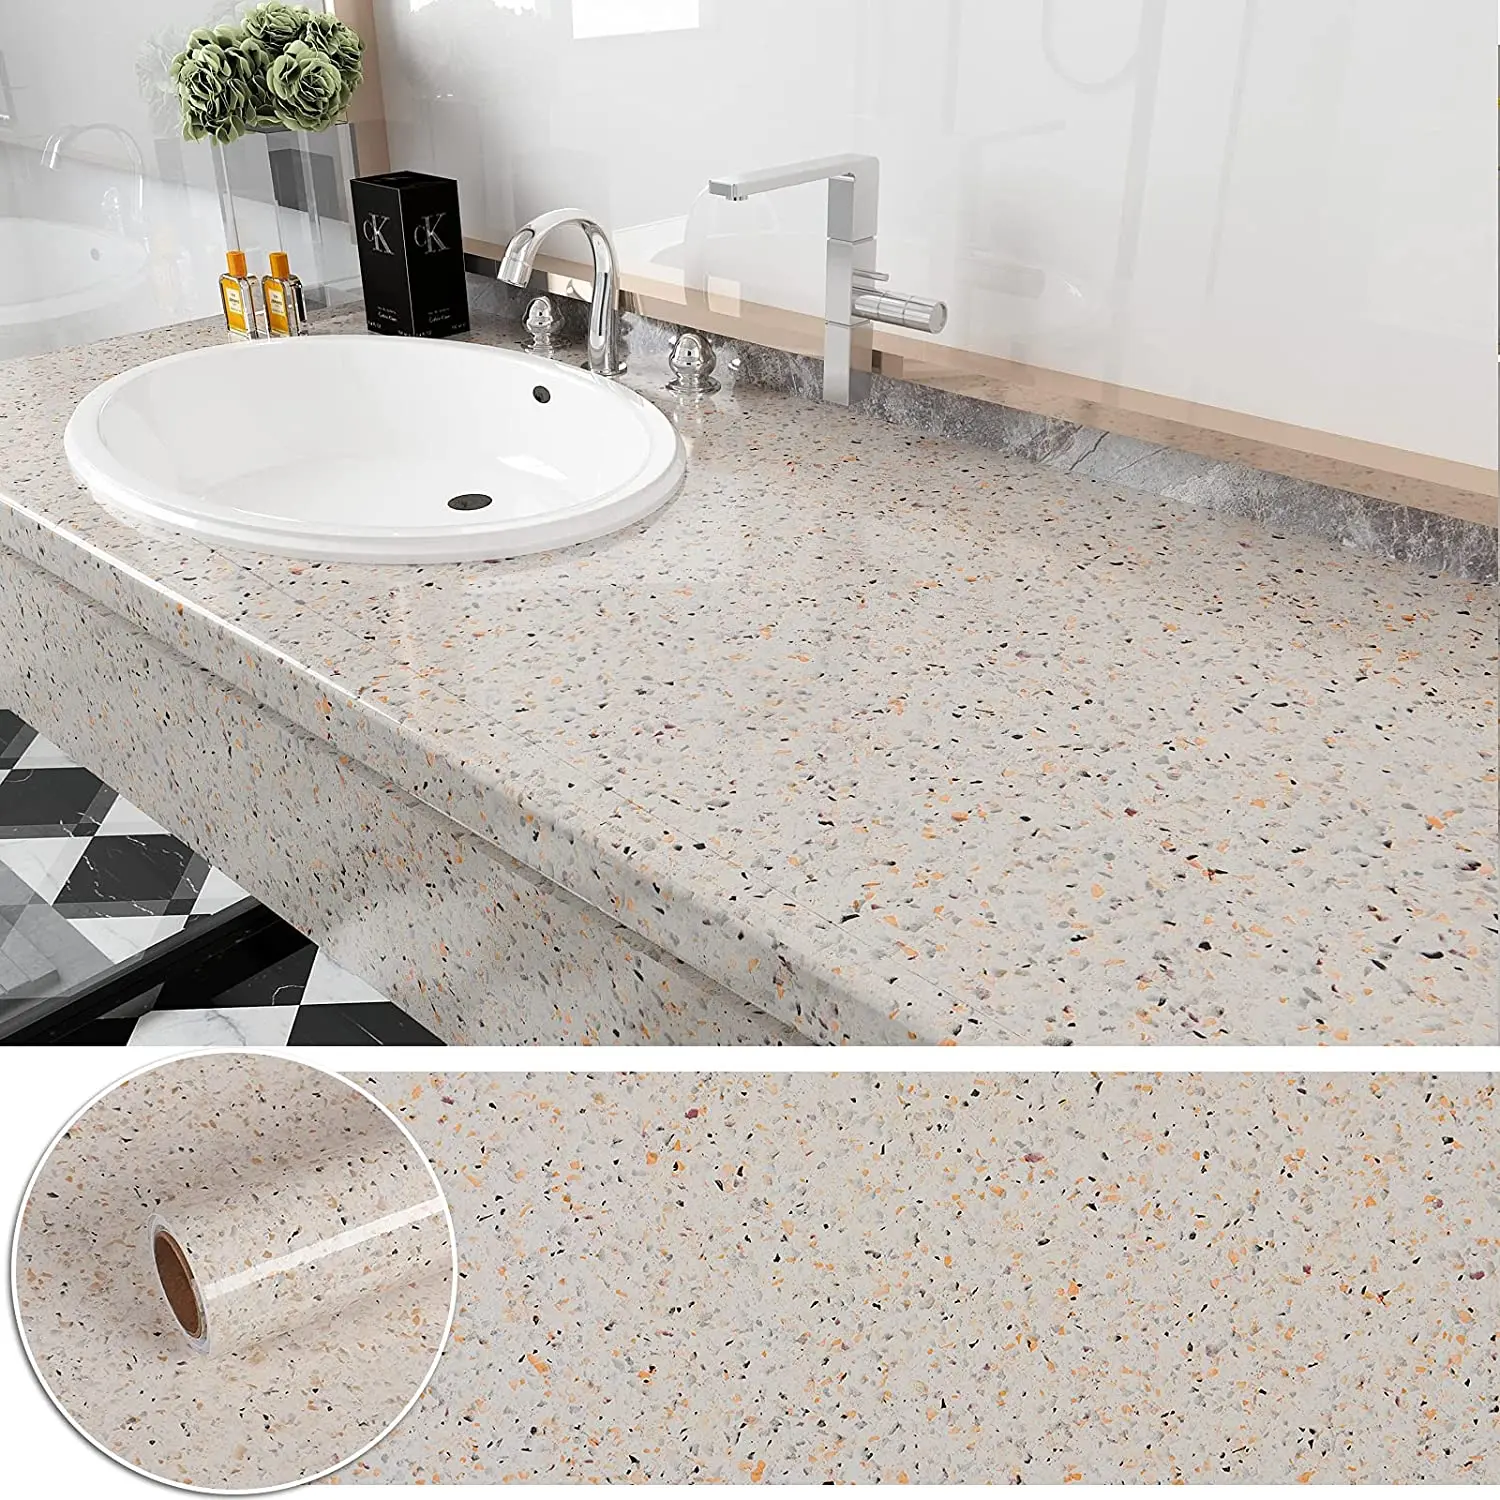 Waterproof Oil-proof Marble Wallpaper Contact Paper Wall Stickers PVC Self Adhesive Bathroom Kitchen Countertop Home Improvement 3